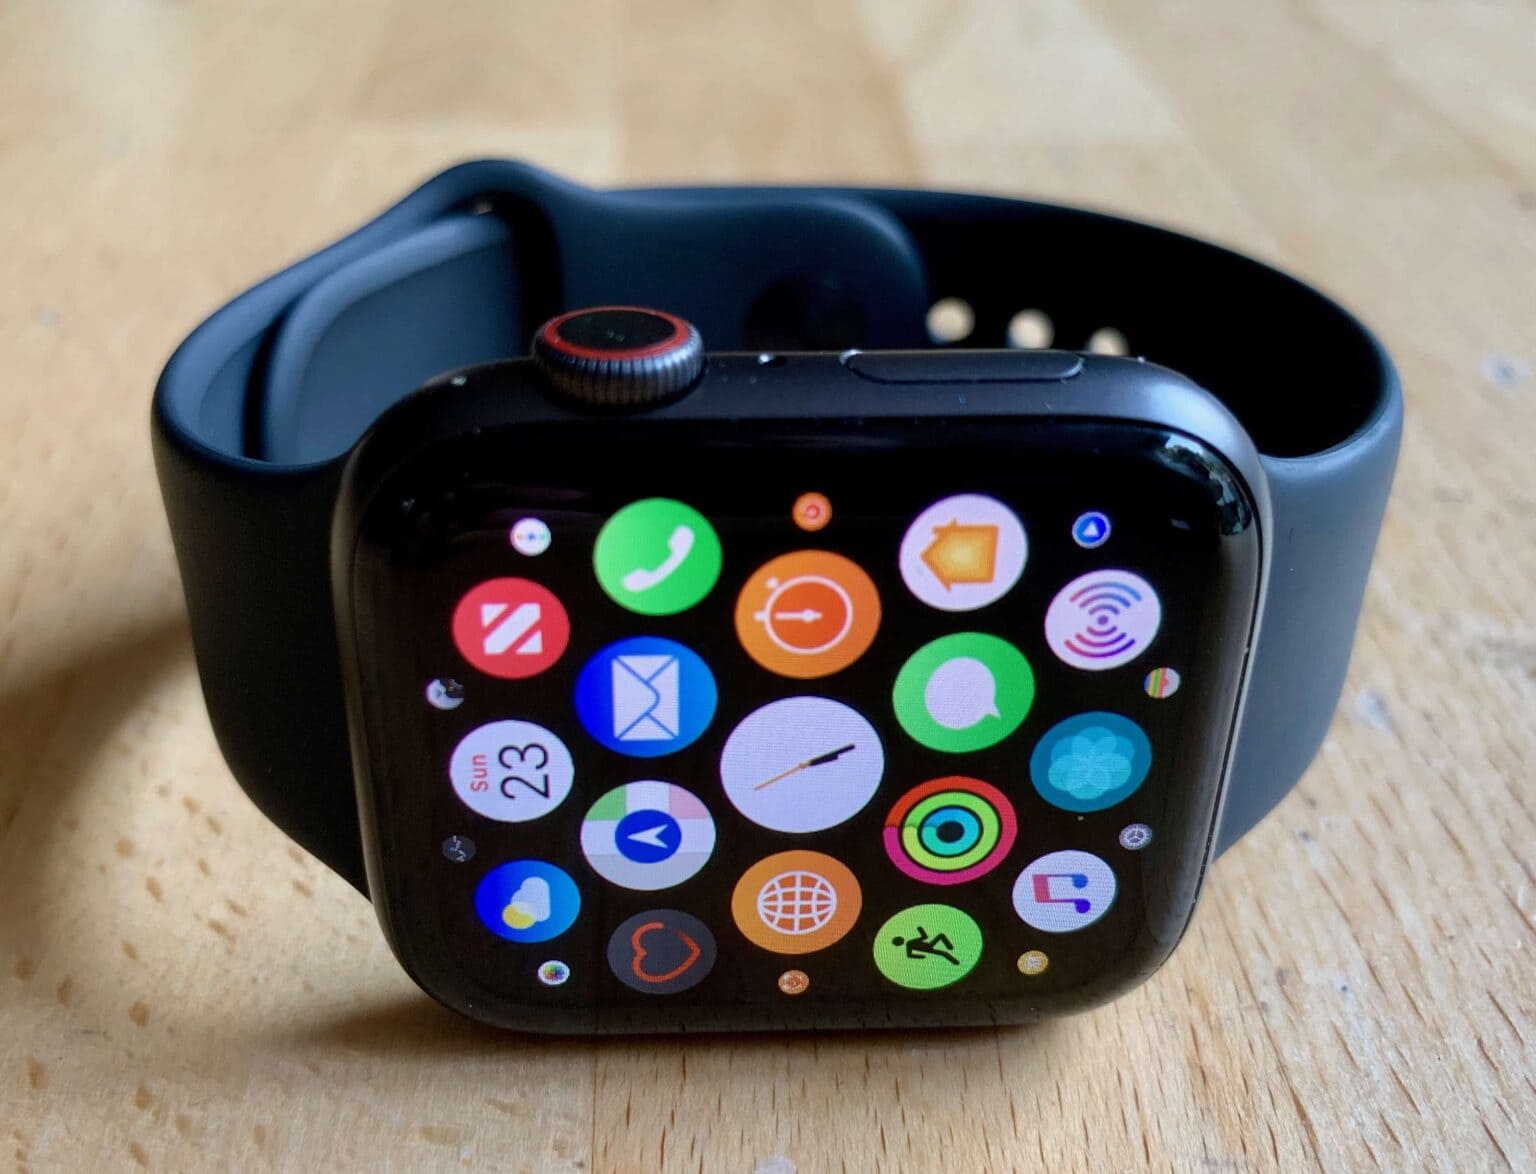 Amazingly, Apple Watch may become even more vital to tracking your health in the near future.